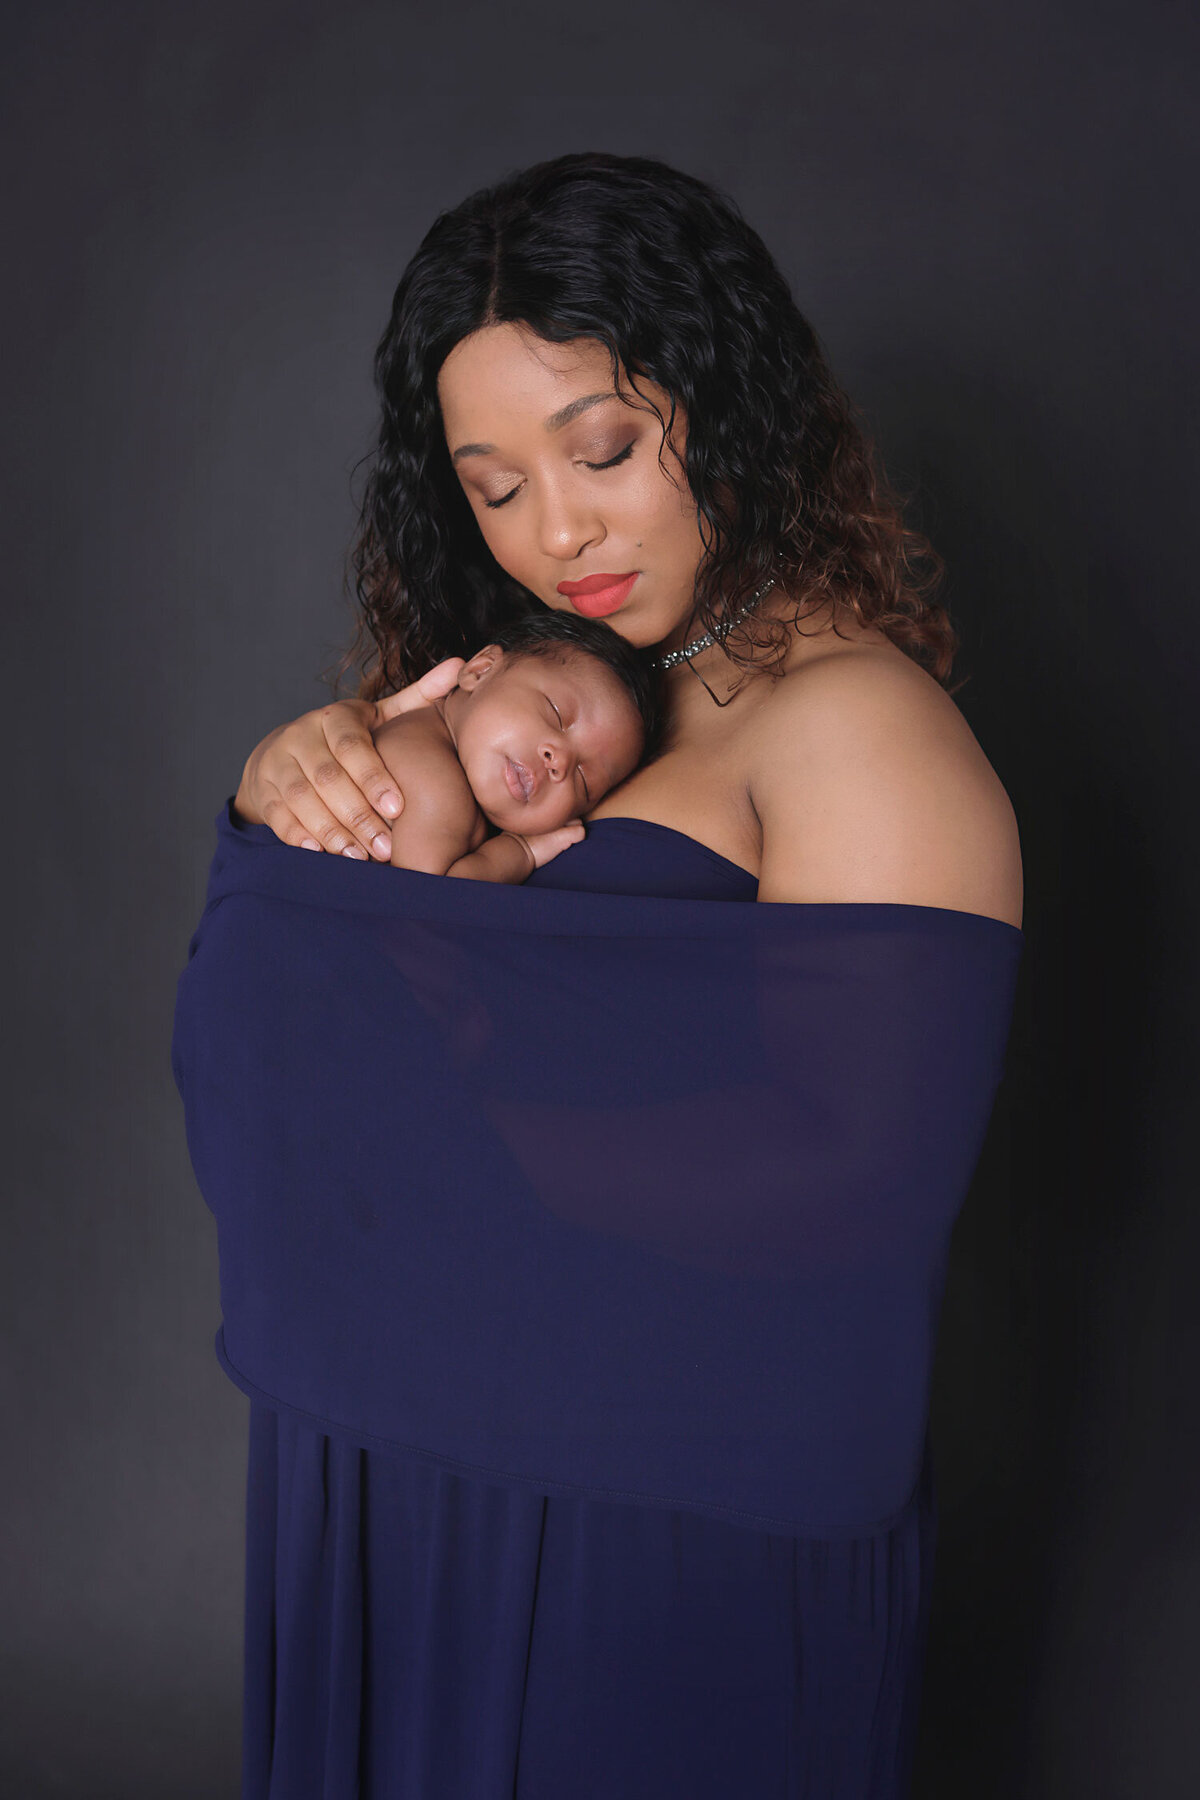 Newborn-boy-ten-day-old-sleeping-in-his-mommies-arms-for-his-newborn-photoshoot